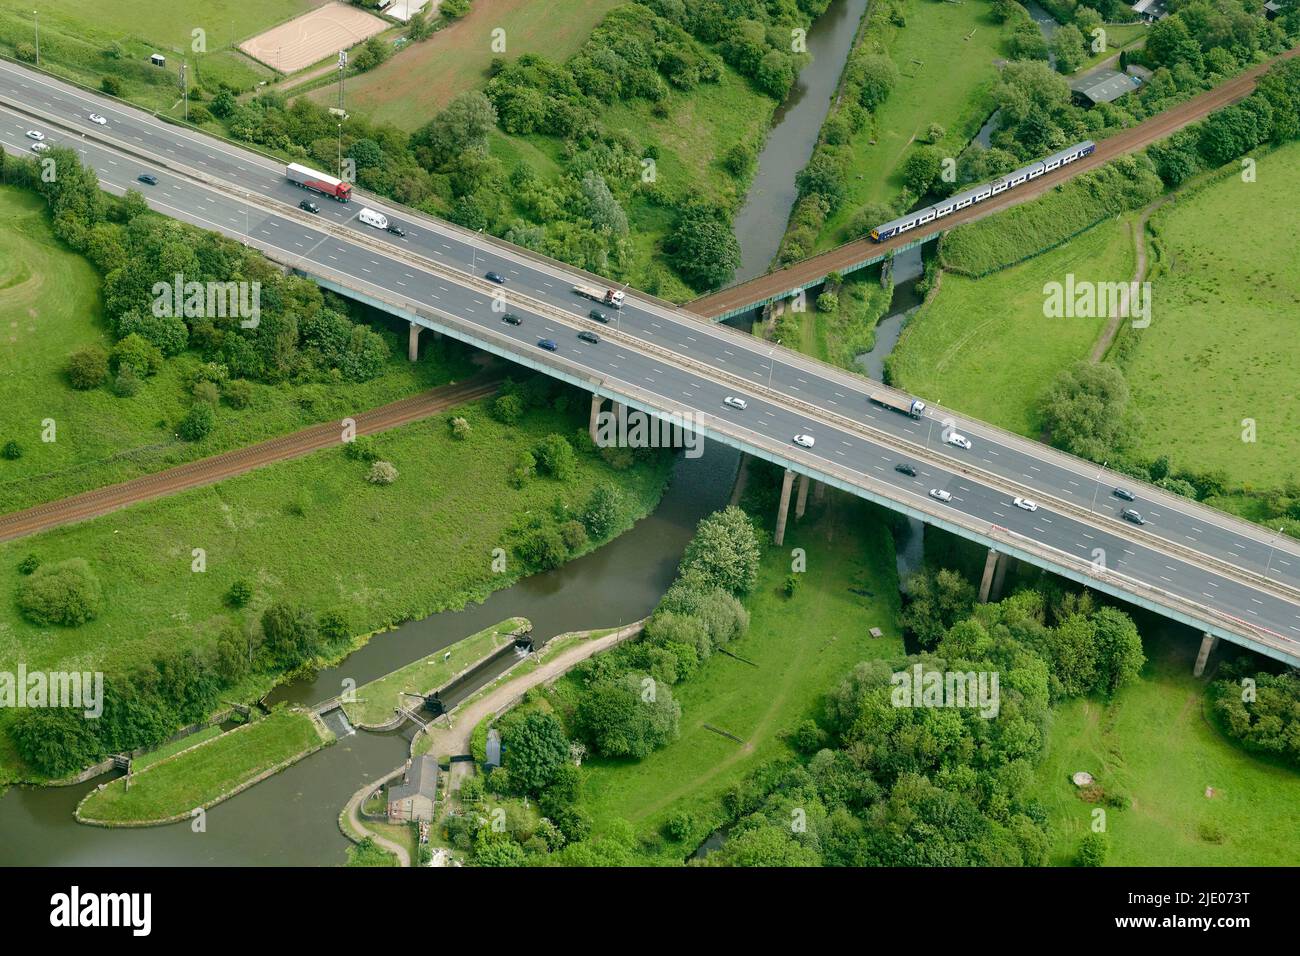 A unique images of three modes of transport, spanning 300 years, The Leeds Liverpool Canal, Rail and M6 Motorway, wigan, North West England UK Stock Photo